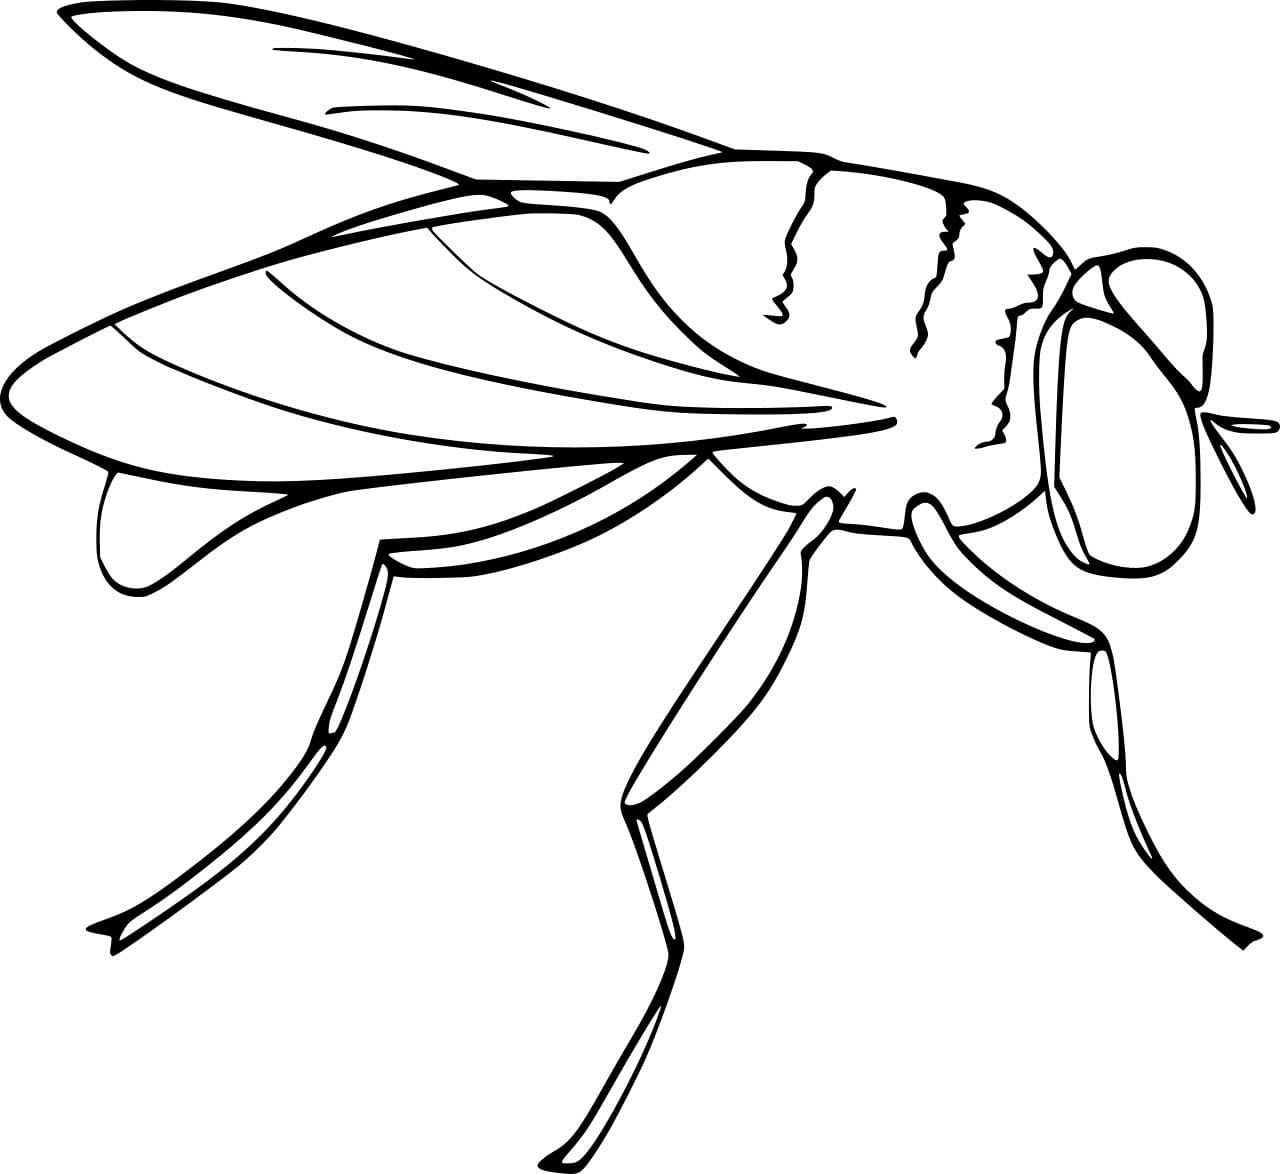 Easy Fly Image Coloring Page